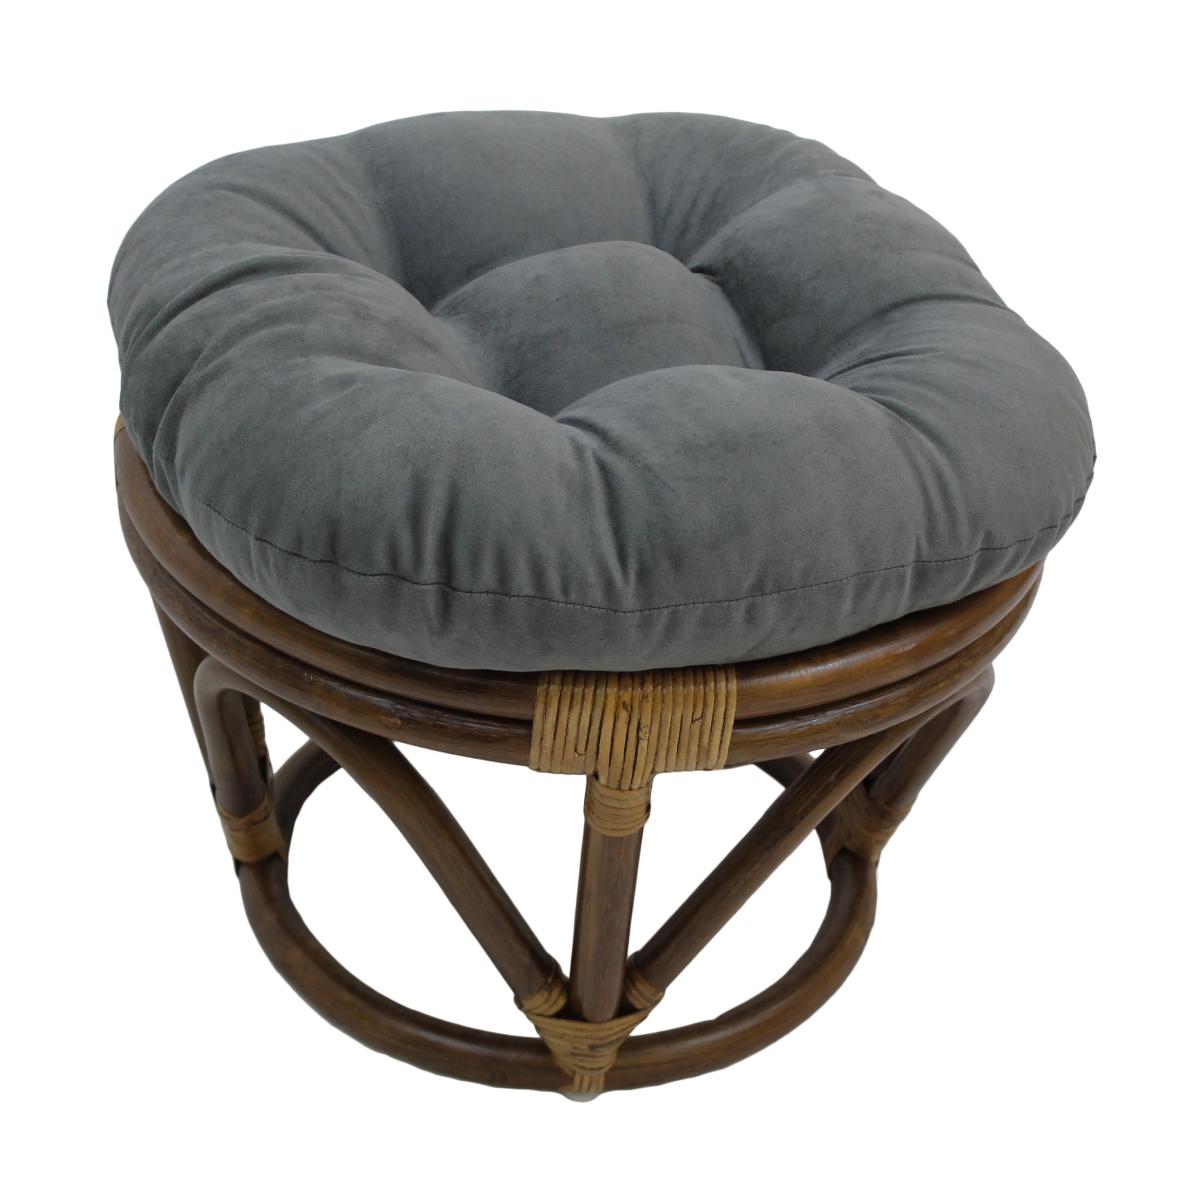 3301-ms-gy Rattan Ottoman With Micro Suede Cushion, Grey